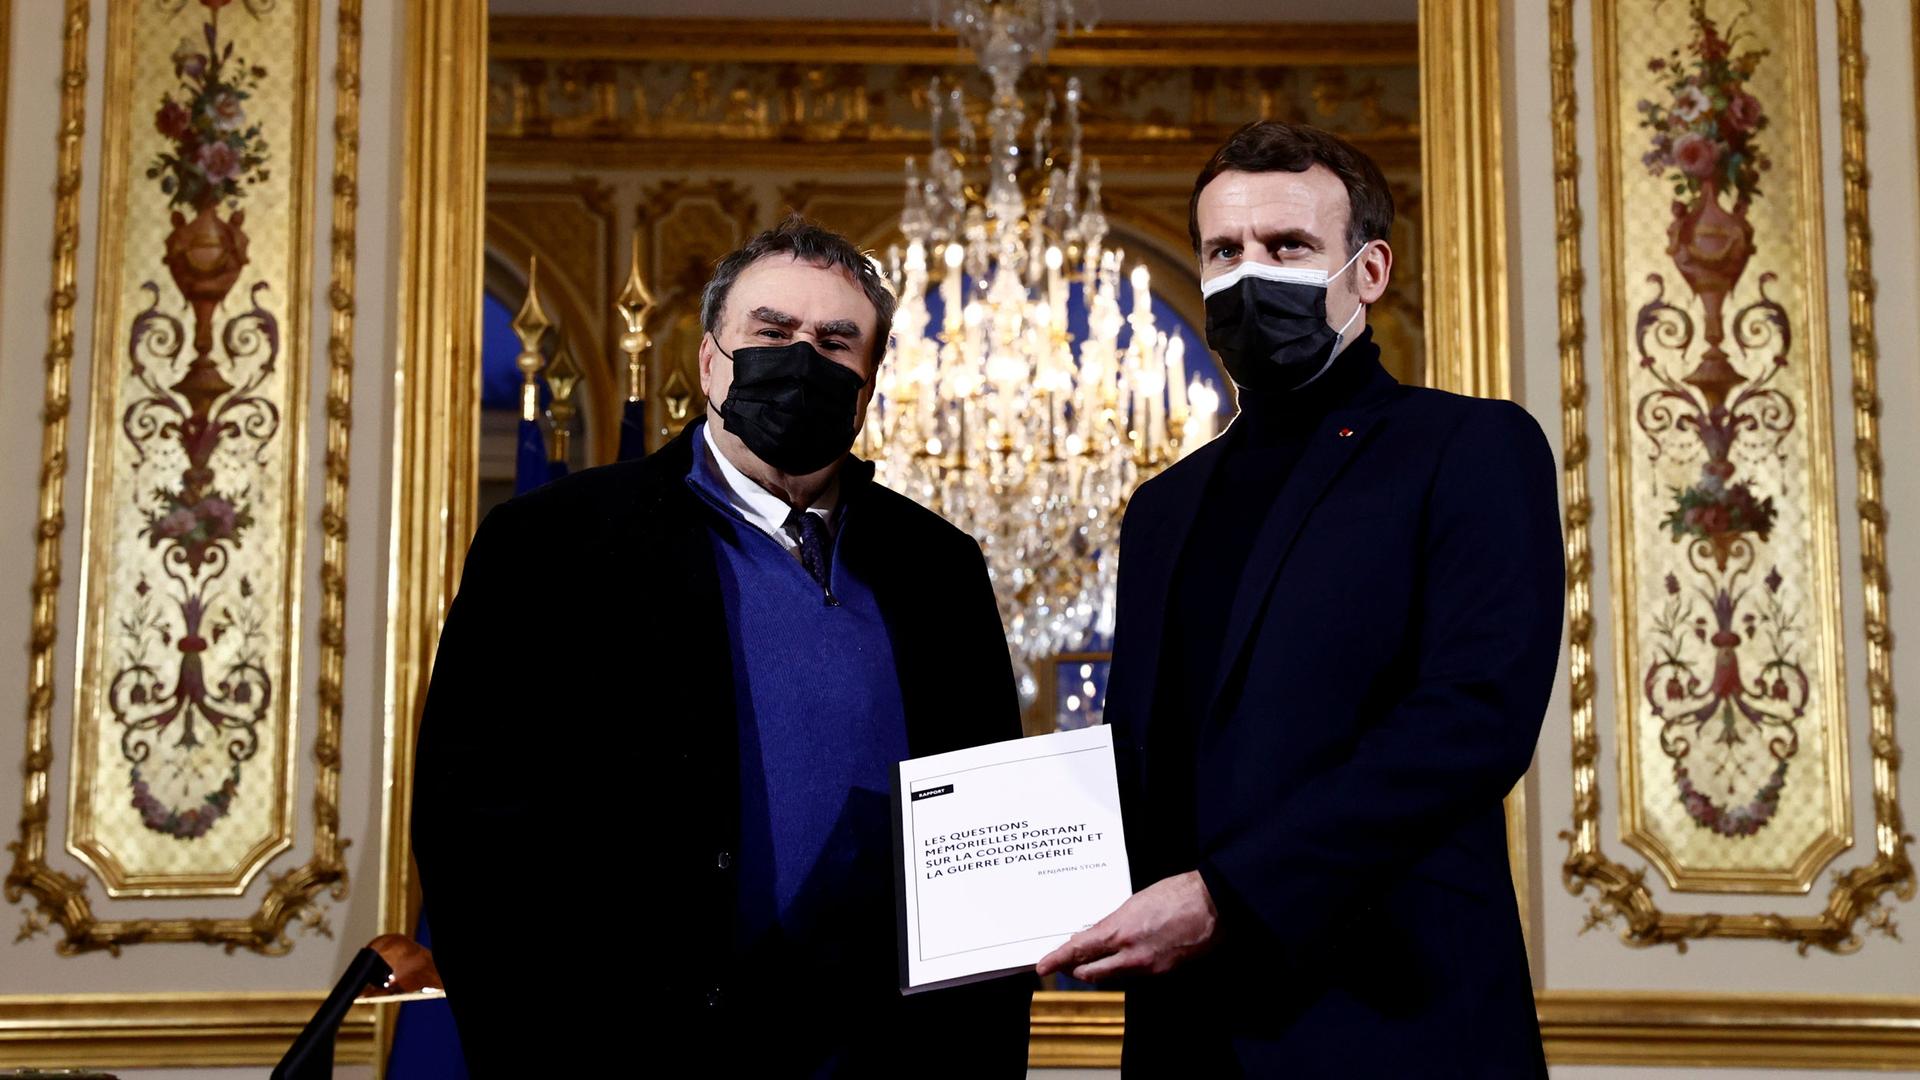 French President Emmanuel Macron is shown standing next to French historian Benjamin Stora, both men wearing dark jackets and Macron holding a white paper.